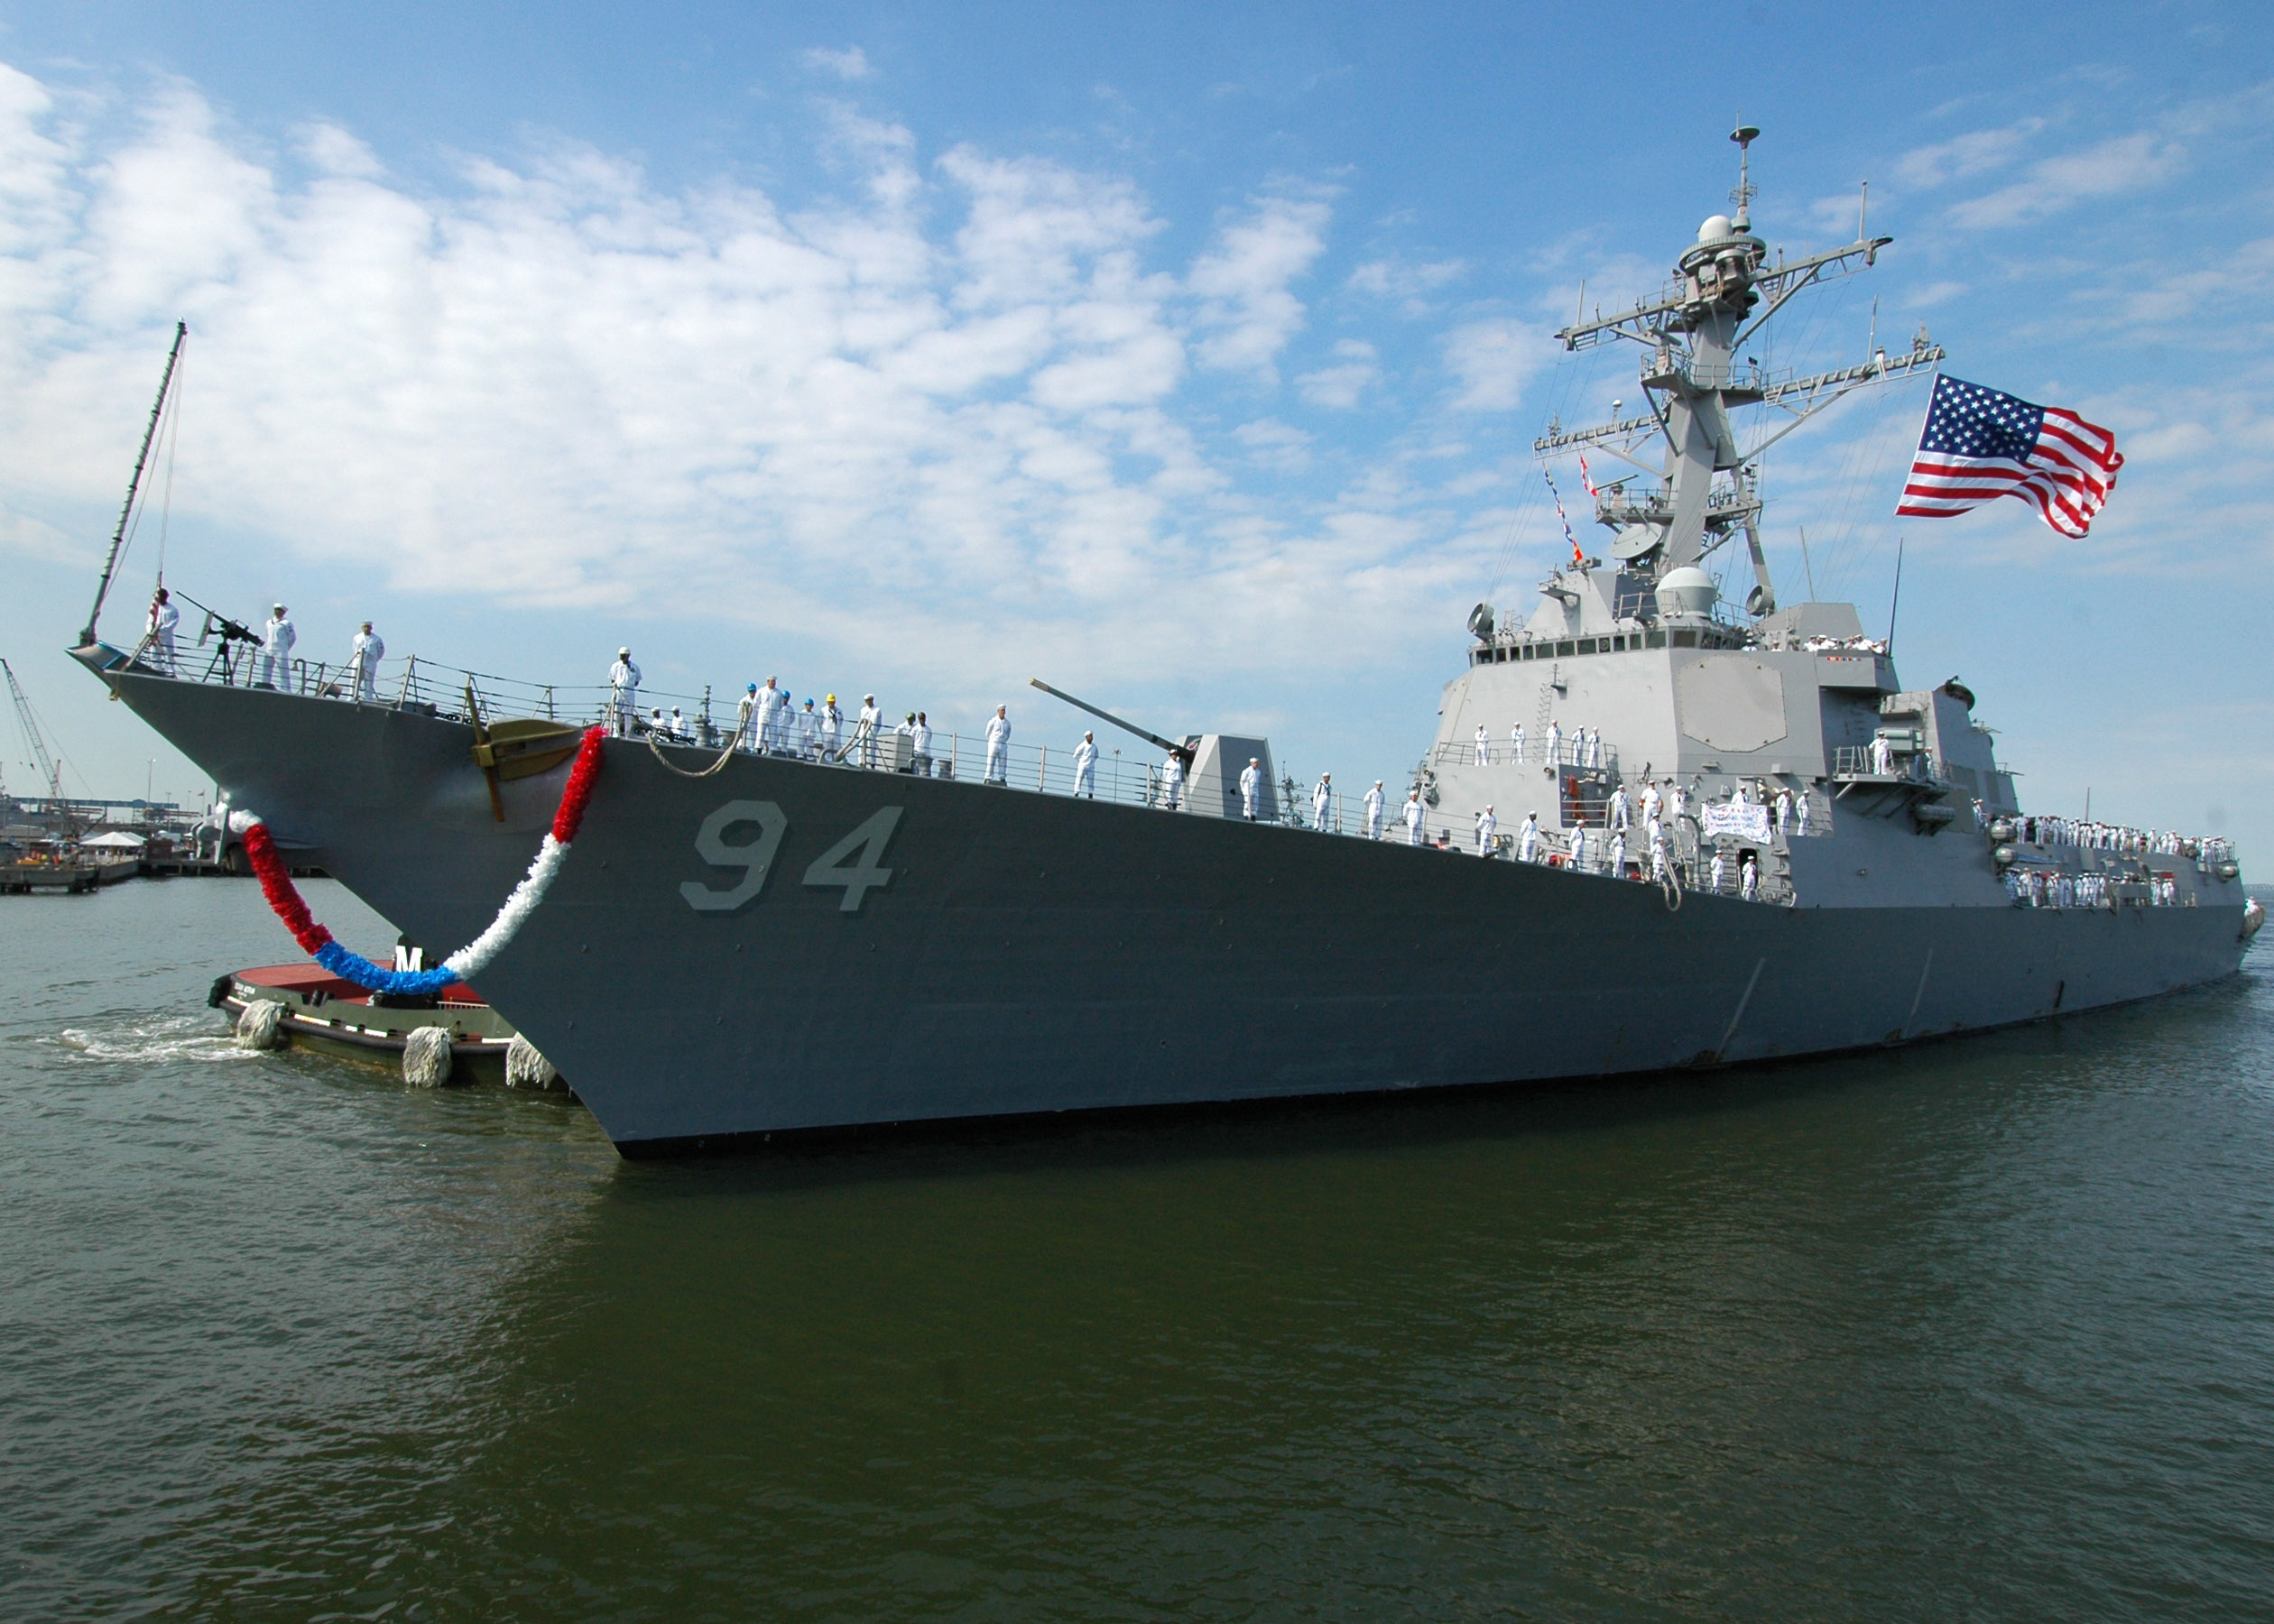 US_Navy_070703-N-6403R-002_Guided-missile_destroyer_USS_Nitze_(DDG_94)_pulls_into_port_at_Naval_Station_Norfolk_after_a_six-month_deployment_as_part_of_Bataan_Expeditionary_Strike_Group_(ESG).jpg